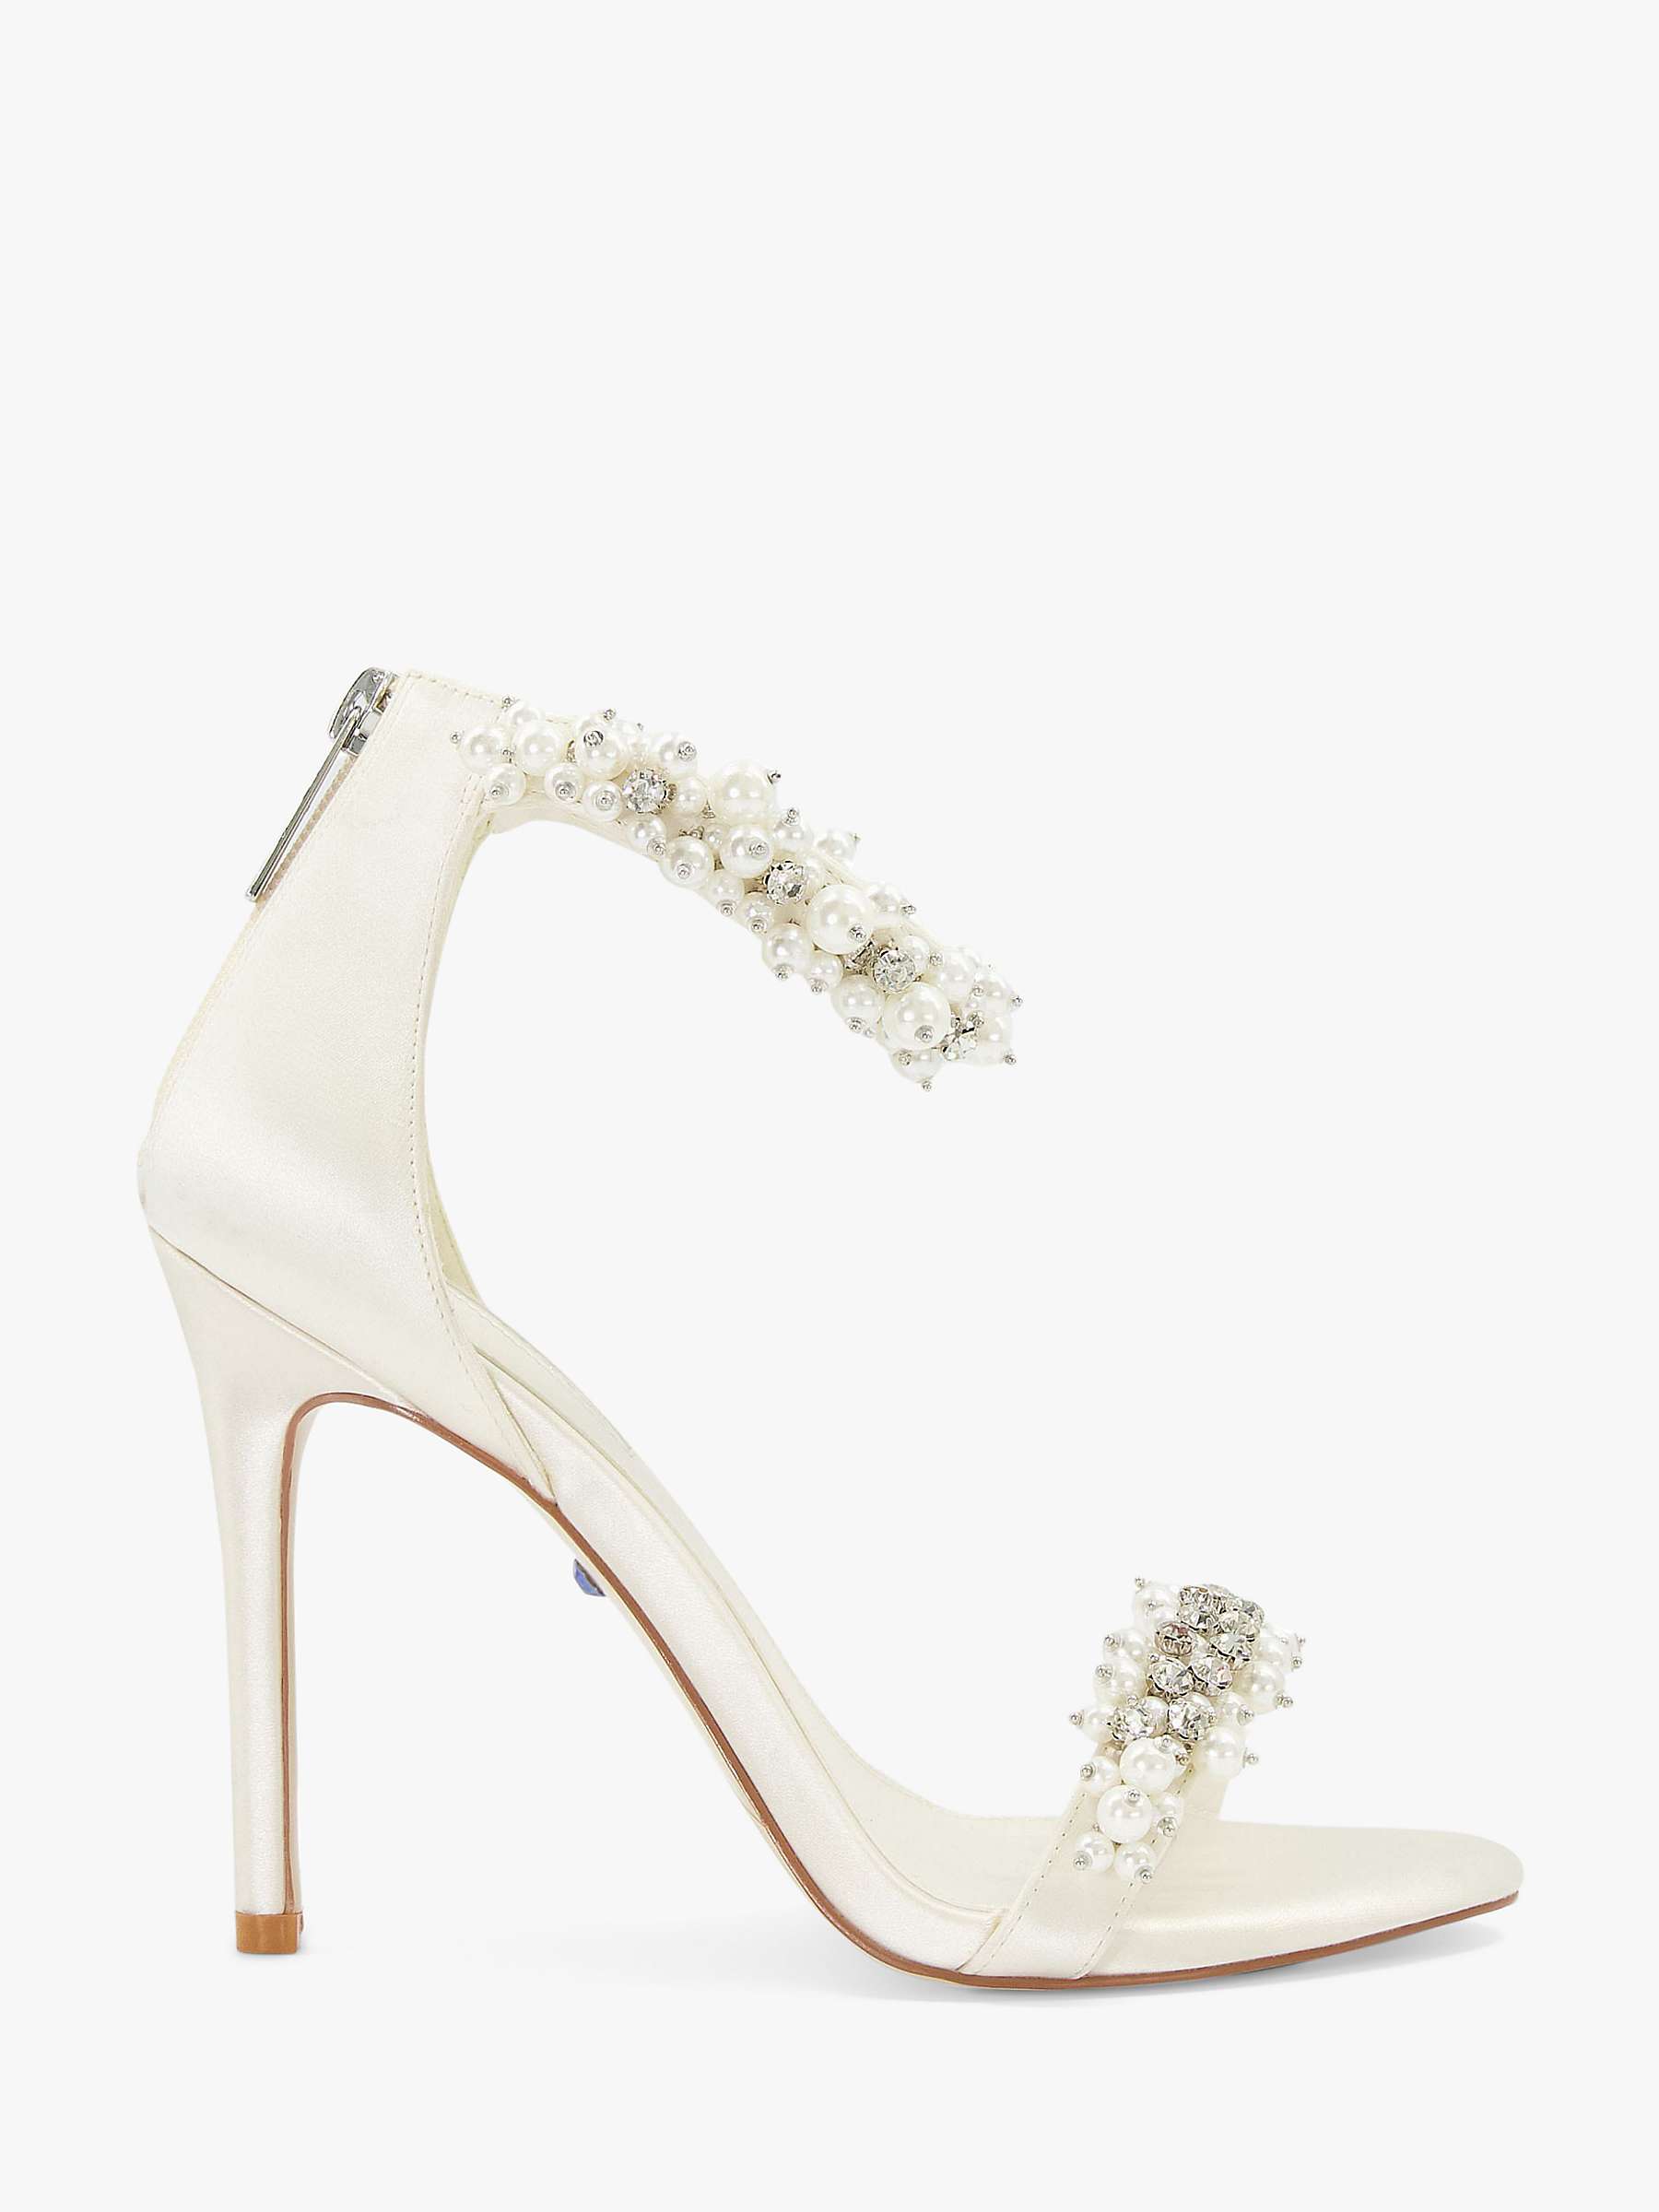 Buy Dune Bridal Collection Wide Fit Marriage Beaded Ankle Trim Wedding Satin Sandals, Ivory Online at johnlewis.com